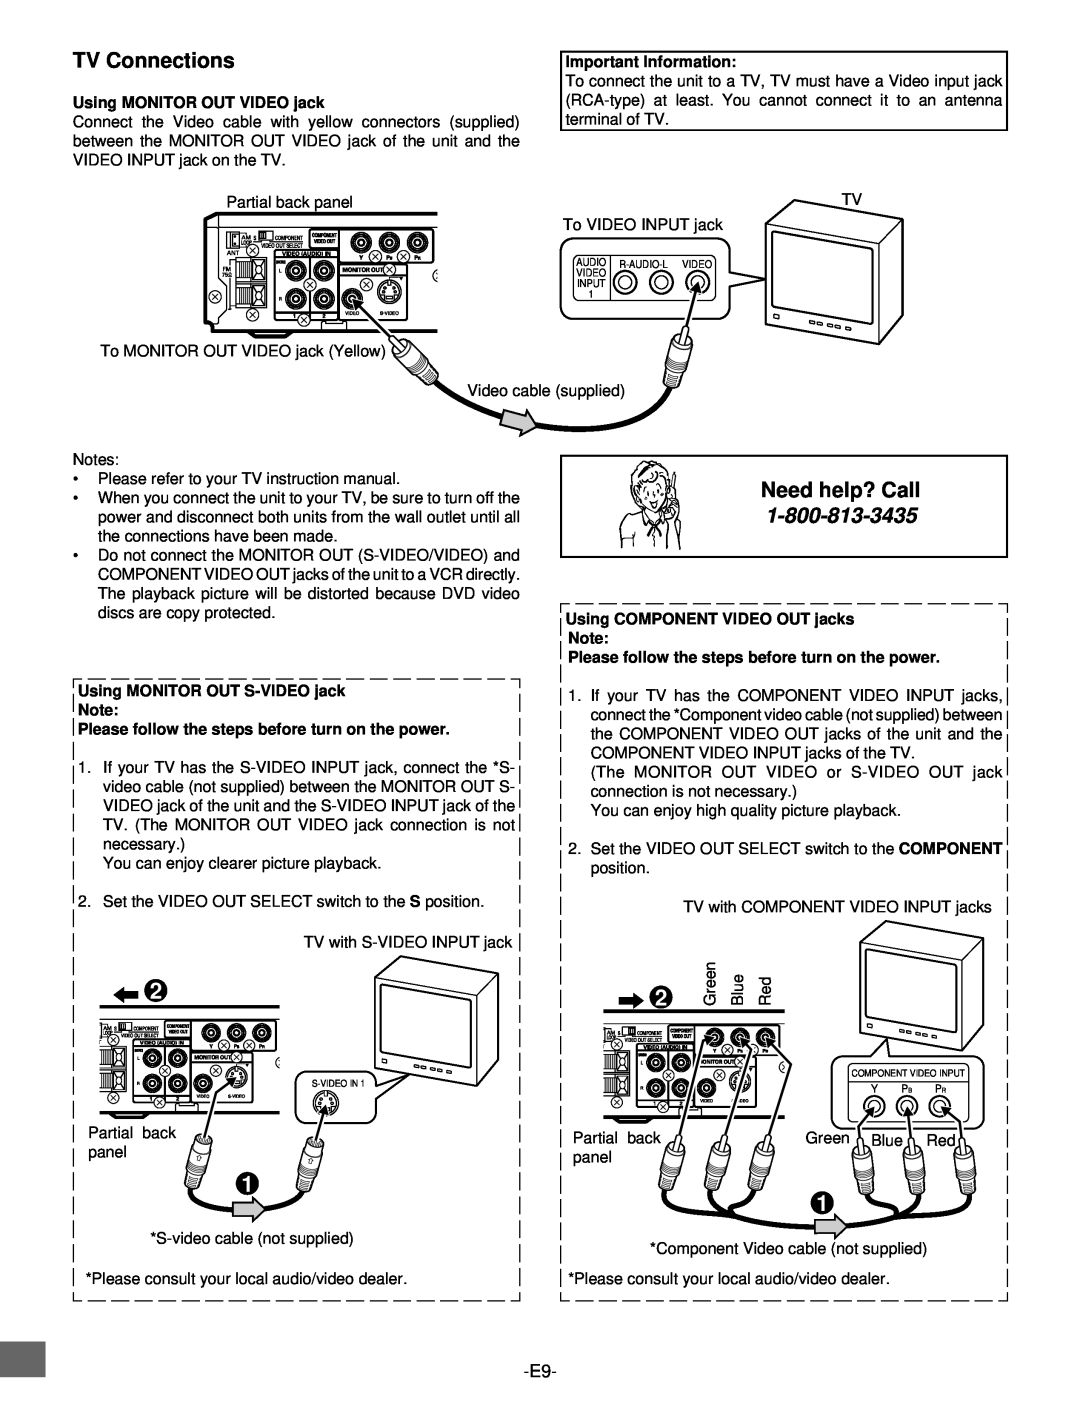 Sanyo DWM-2500 instruction manual TV Connections, Need help? Call, Using MONITOR OUT VIDEO jack, Important Information 